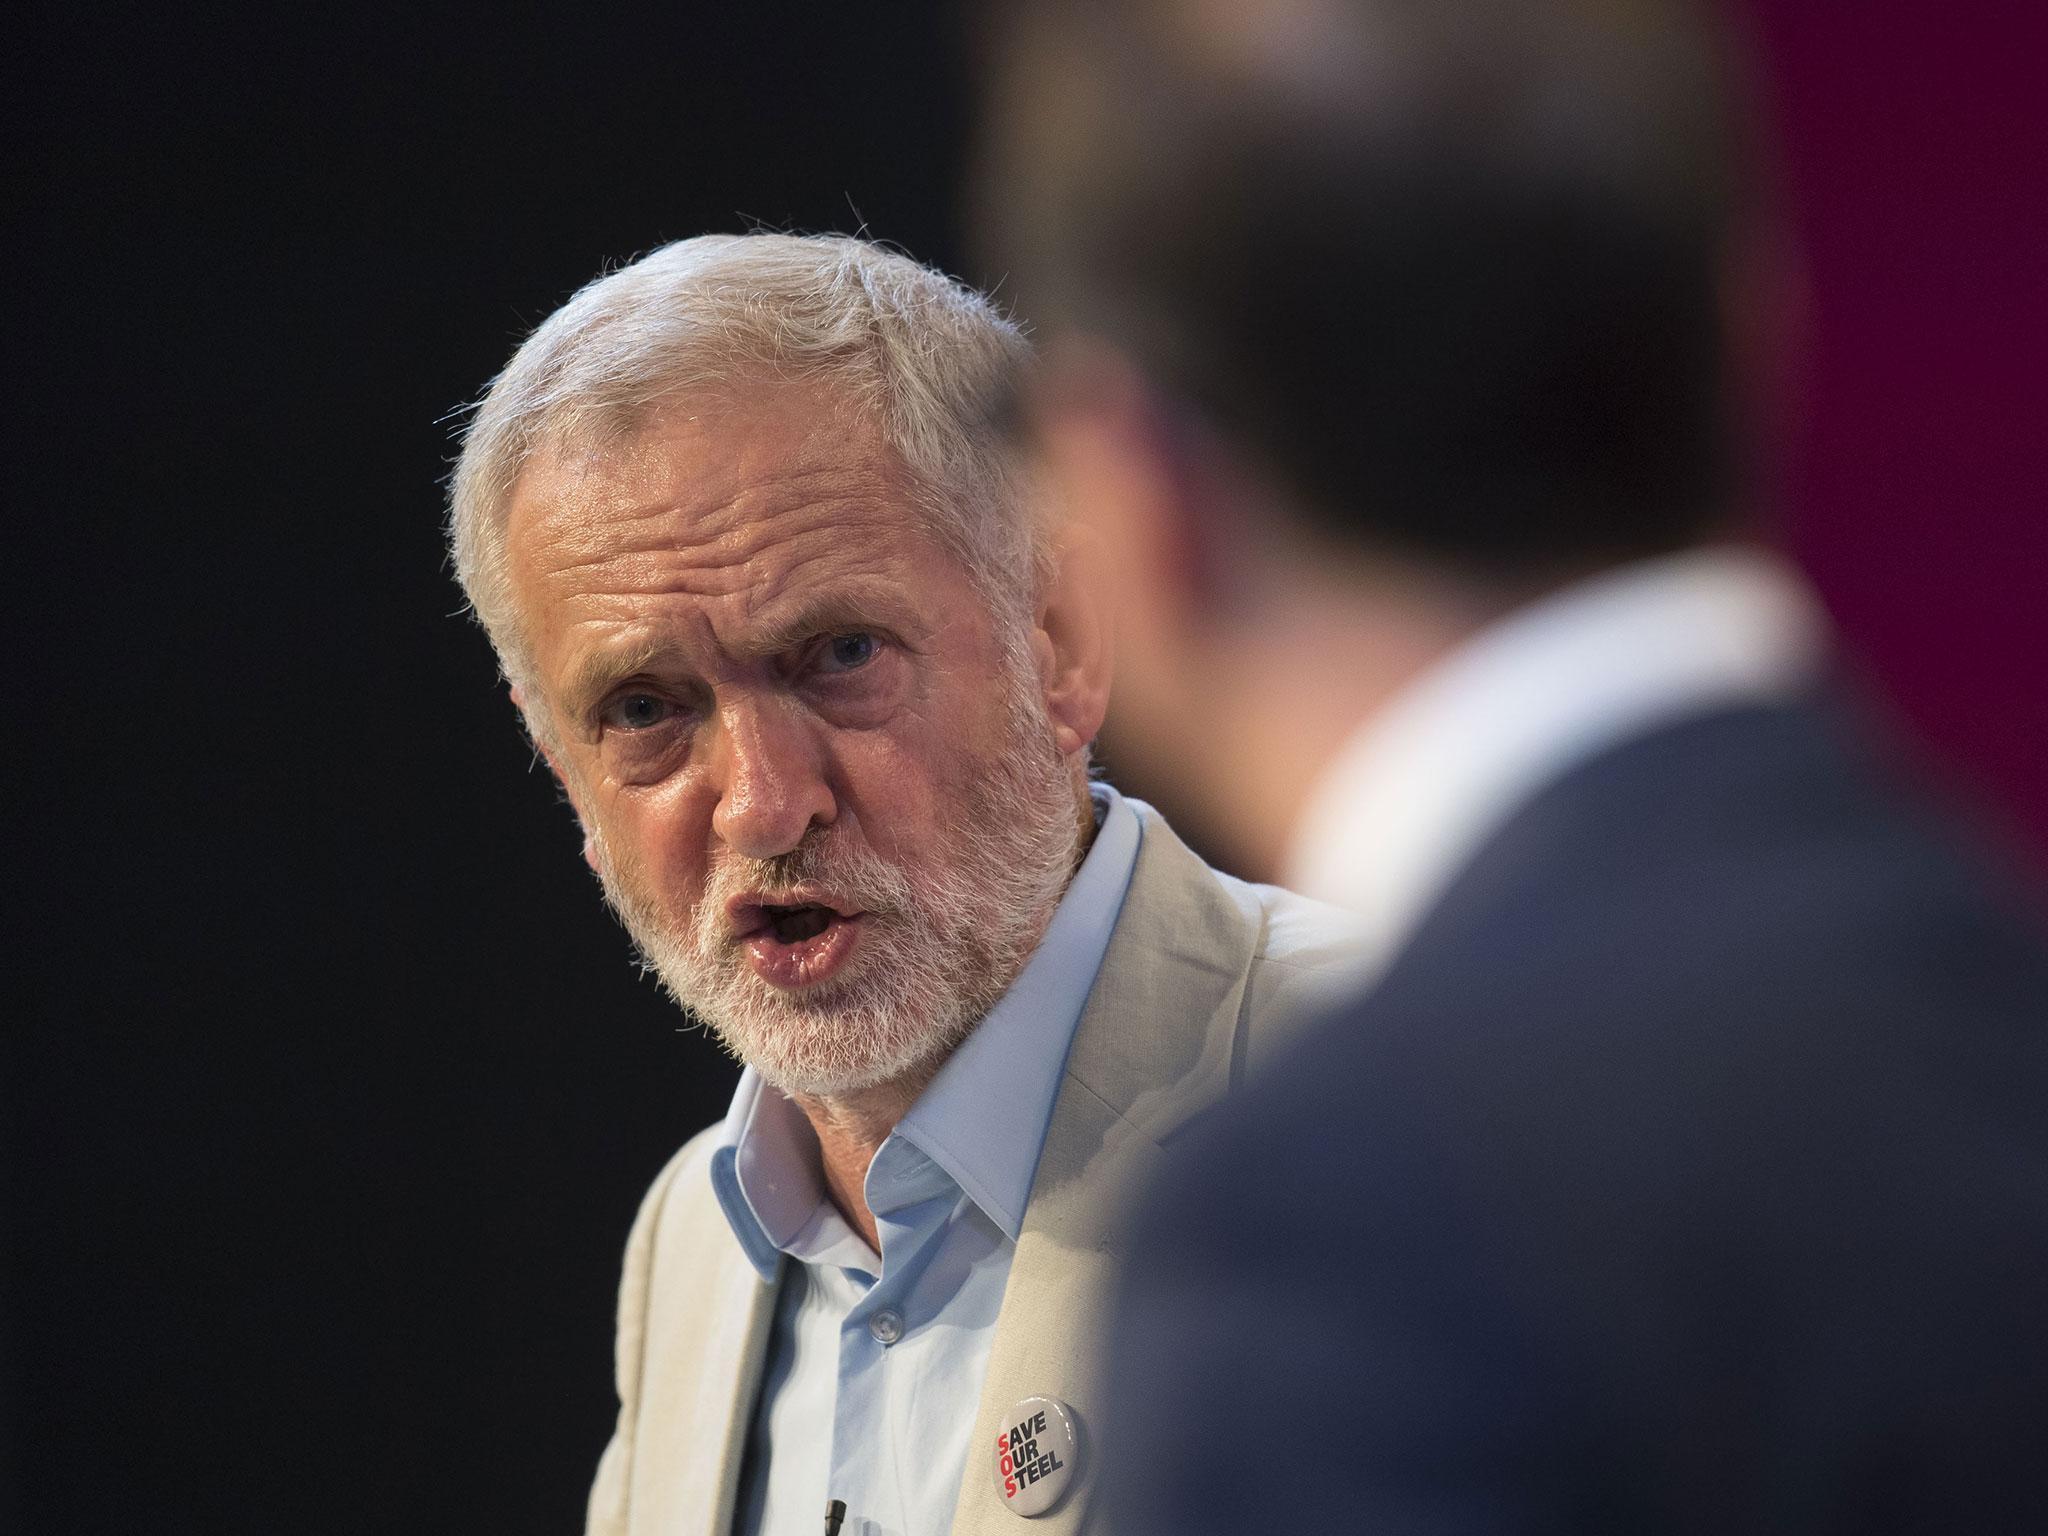 Jeremy Corbyn looks increasingly likely to see off Owen Smith’s challenge and win re-election as Labour leader next month